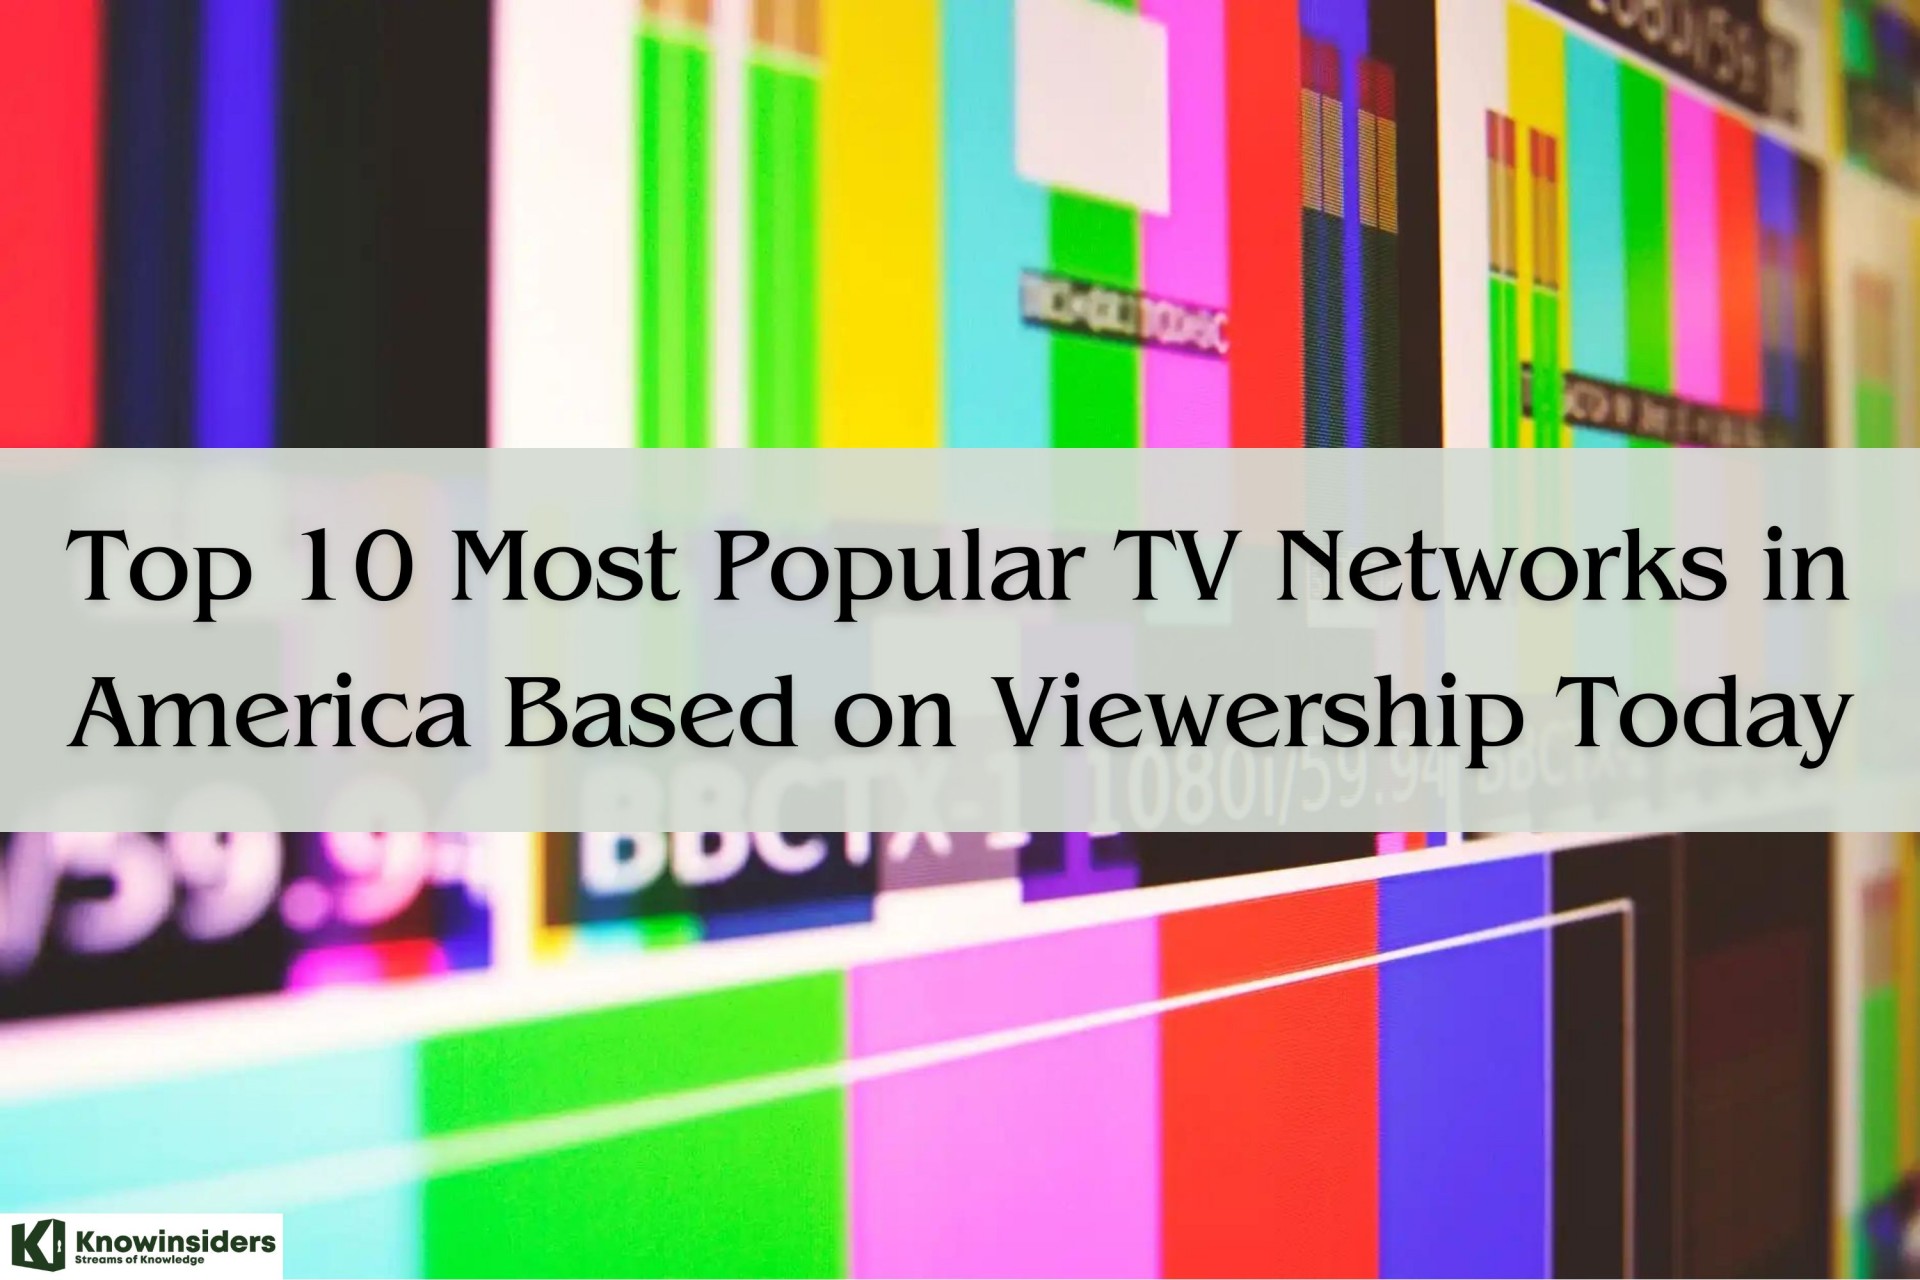 Top 10 Most Popular TV Networks in America Based on Viewership